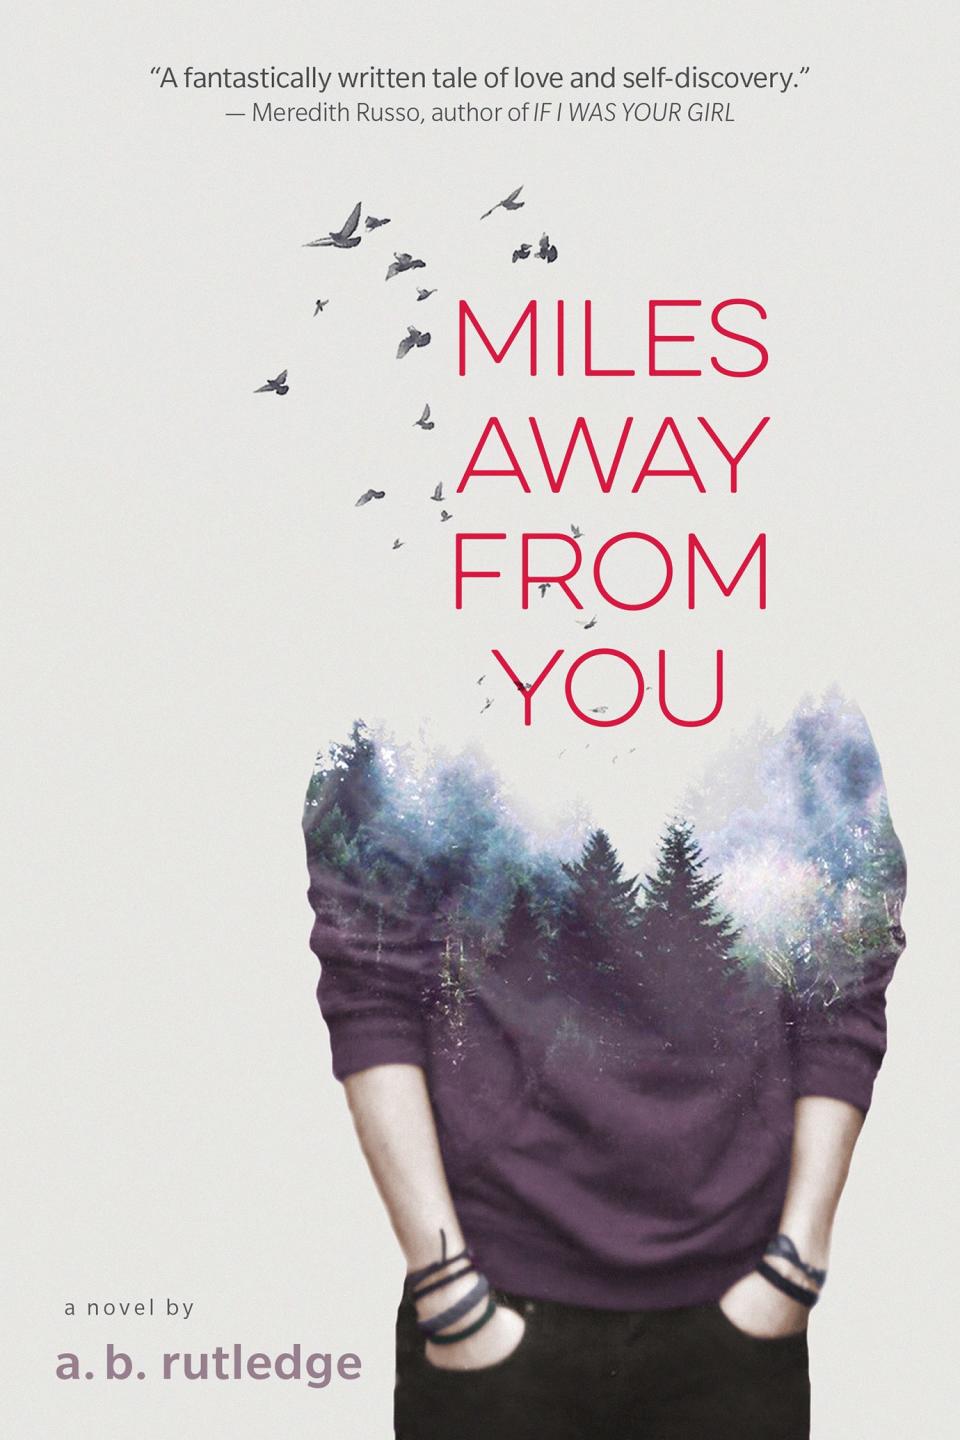 Miles Away From You by A.B. Rutledge (Out on March 20, 2018)